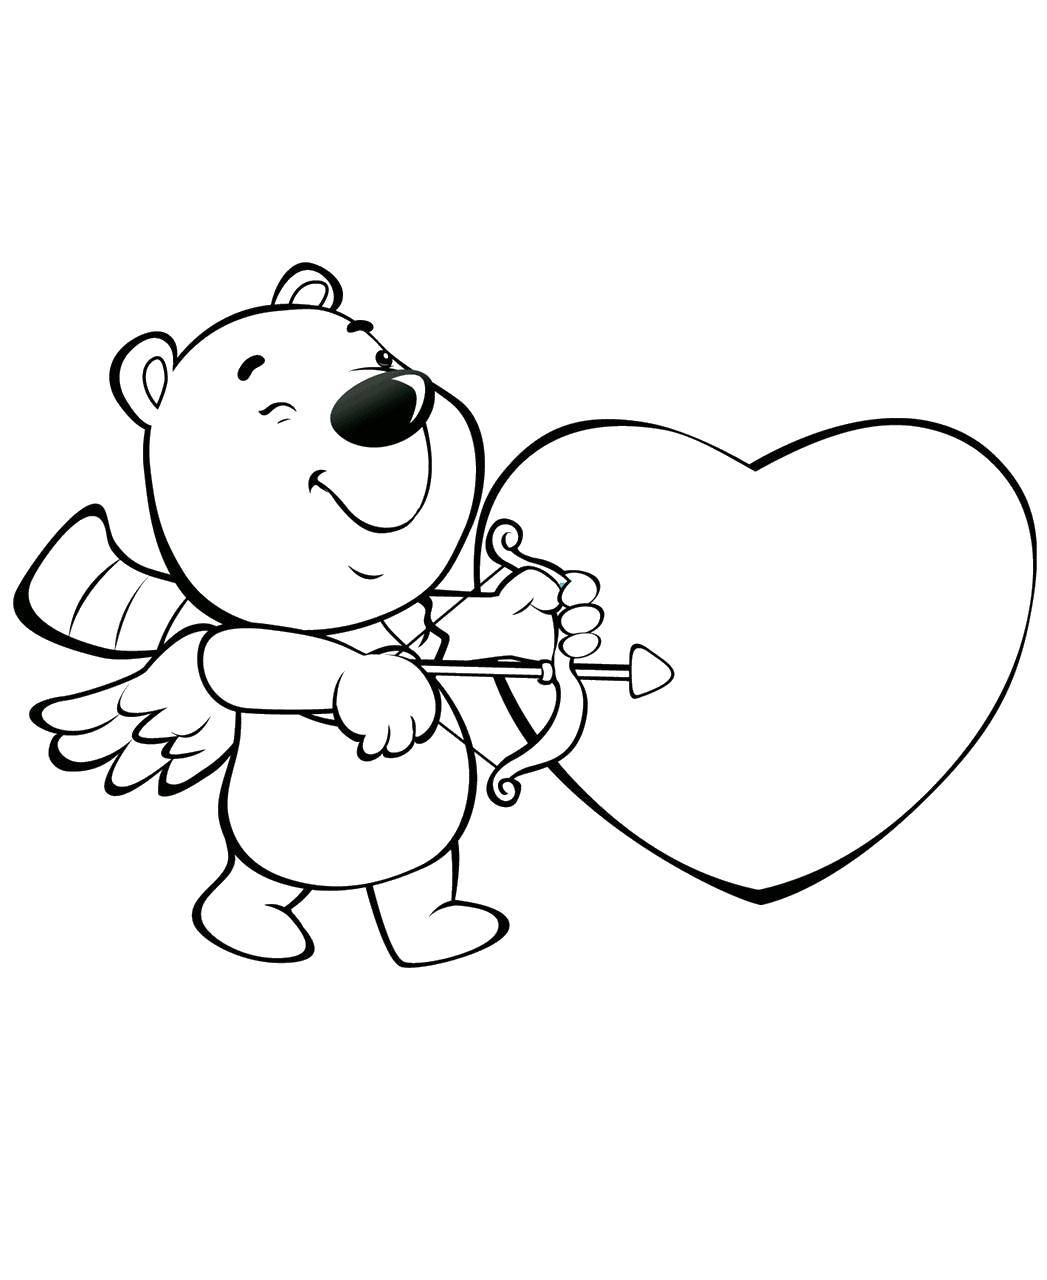 Coloring Winnie the Pooh Cupid. Category Cartoon character. Tags:  Cartoon character, Winnie the Pooh, Cupid, heart.